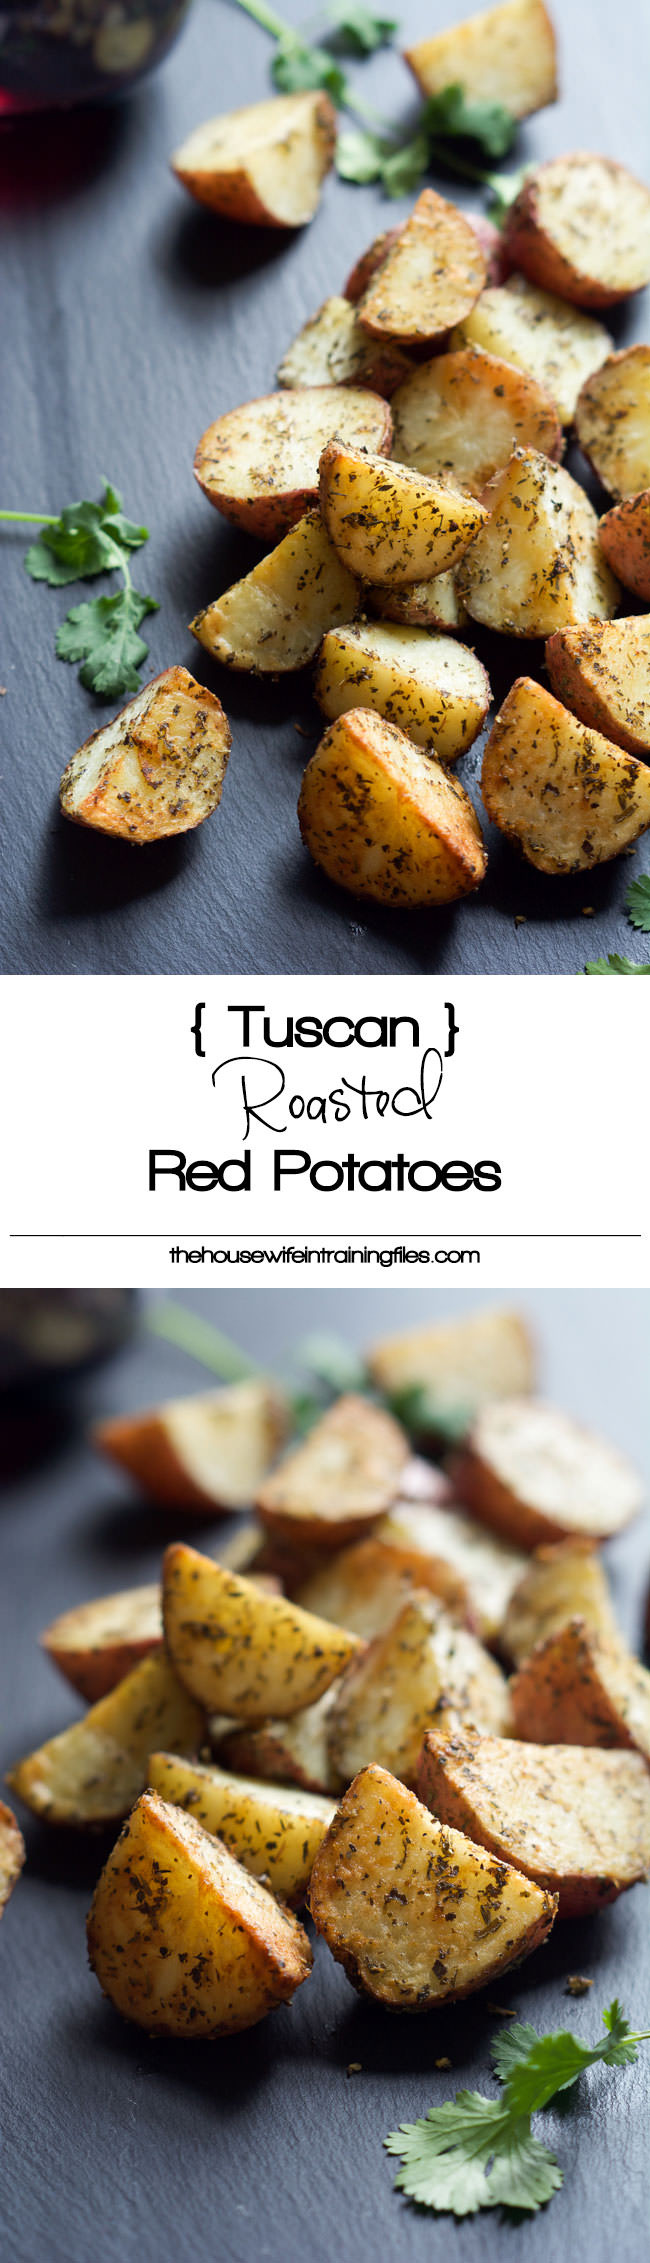 Healthy Roasted Red Potatoes
 Simple Tuscan Oven Roasted Red Potatoes